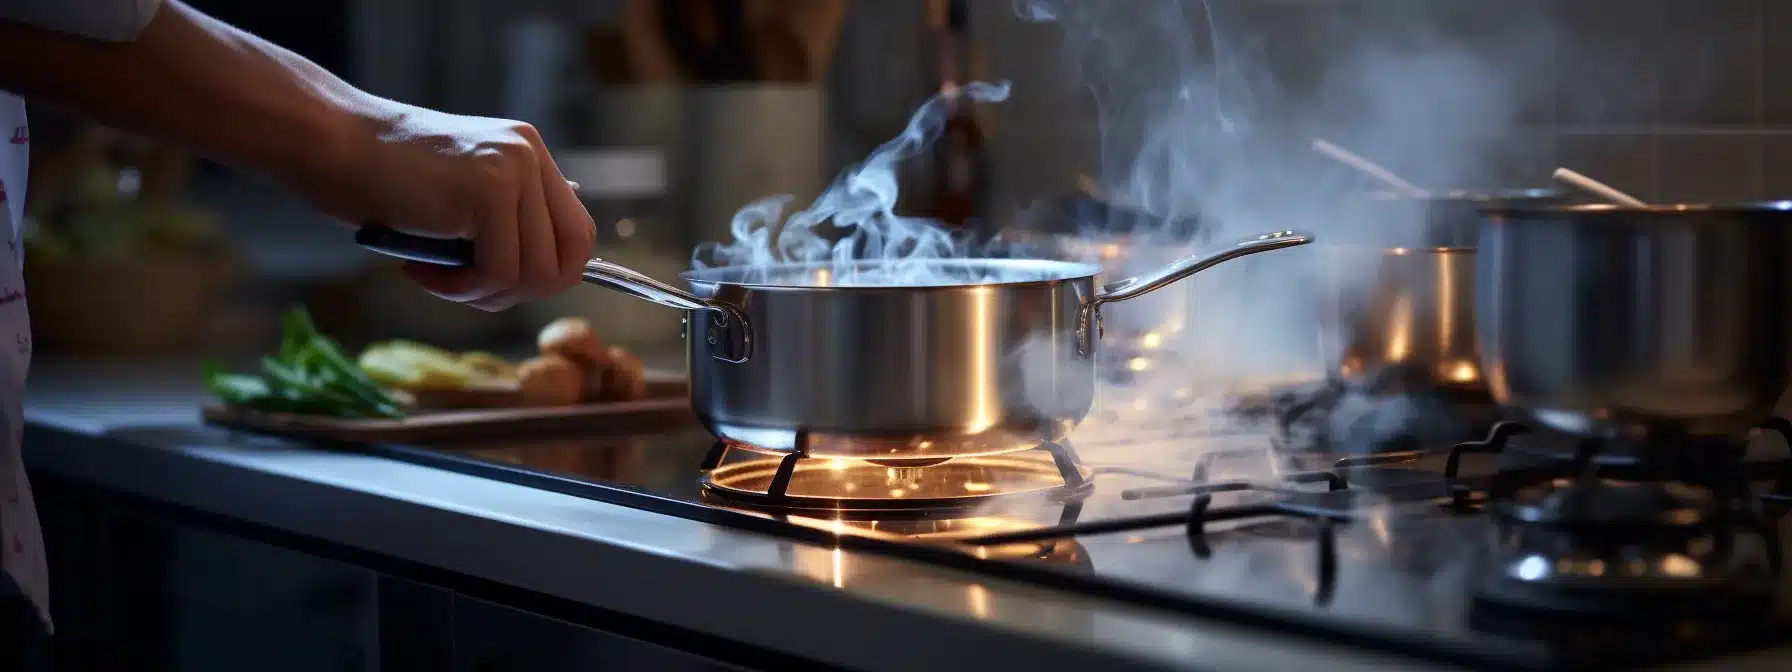 A Person Confidently Stirring A Pot On A Stove, Symbolizing The Implementation Of A Consistent Branding Strategy.